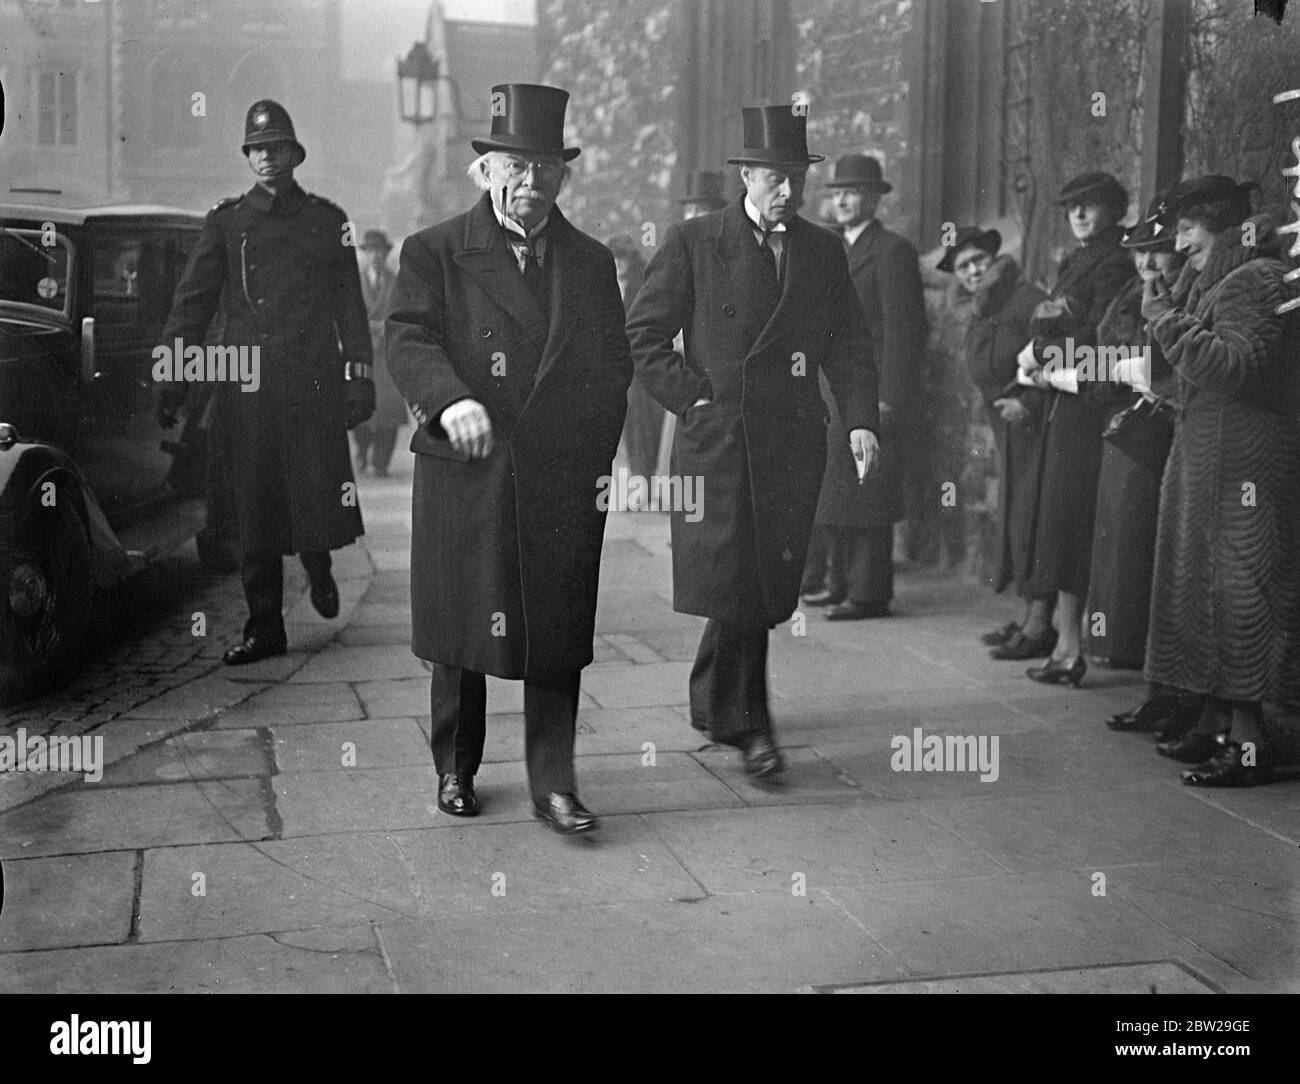 Mr Lloyd George at Abbey service for Mr MacDonald. Statesman formed a considerable part of the congregation when the funeral service for for Mr Ramsay MacDonald took place in Westminster Abbey. Photo shows, Mr Lloyd George, arriving for the service. 26 November 1937 Stock Photo